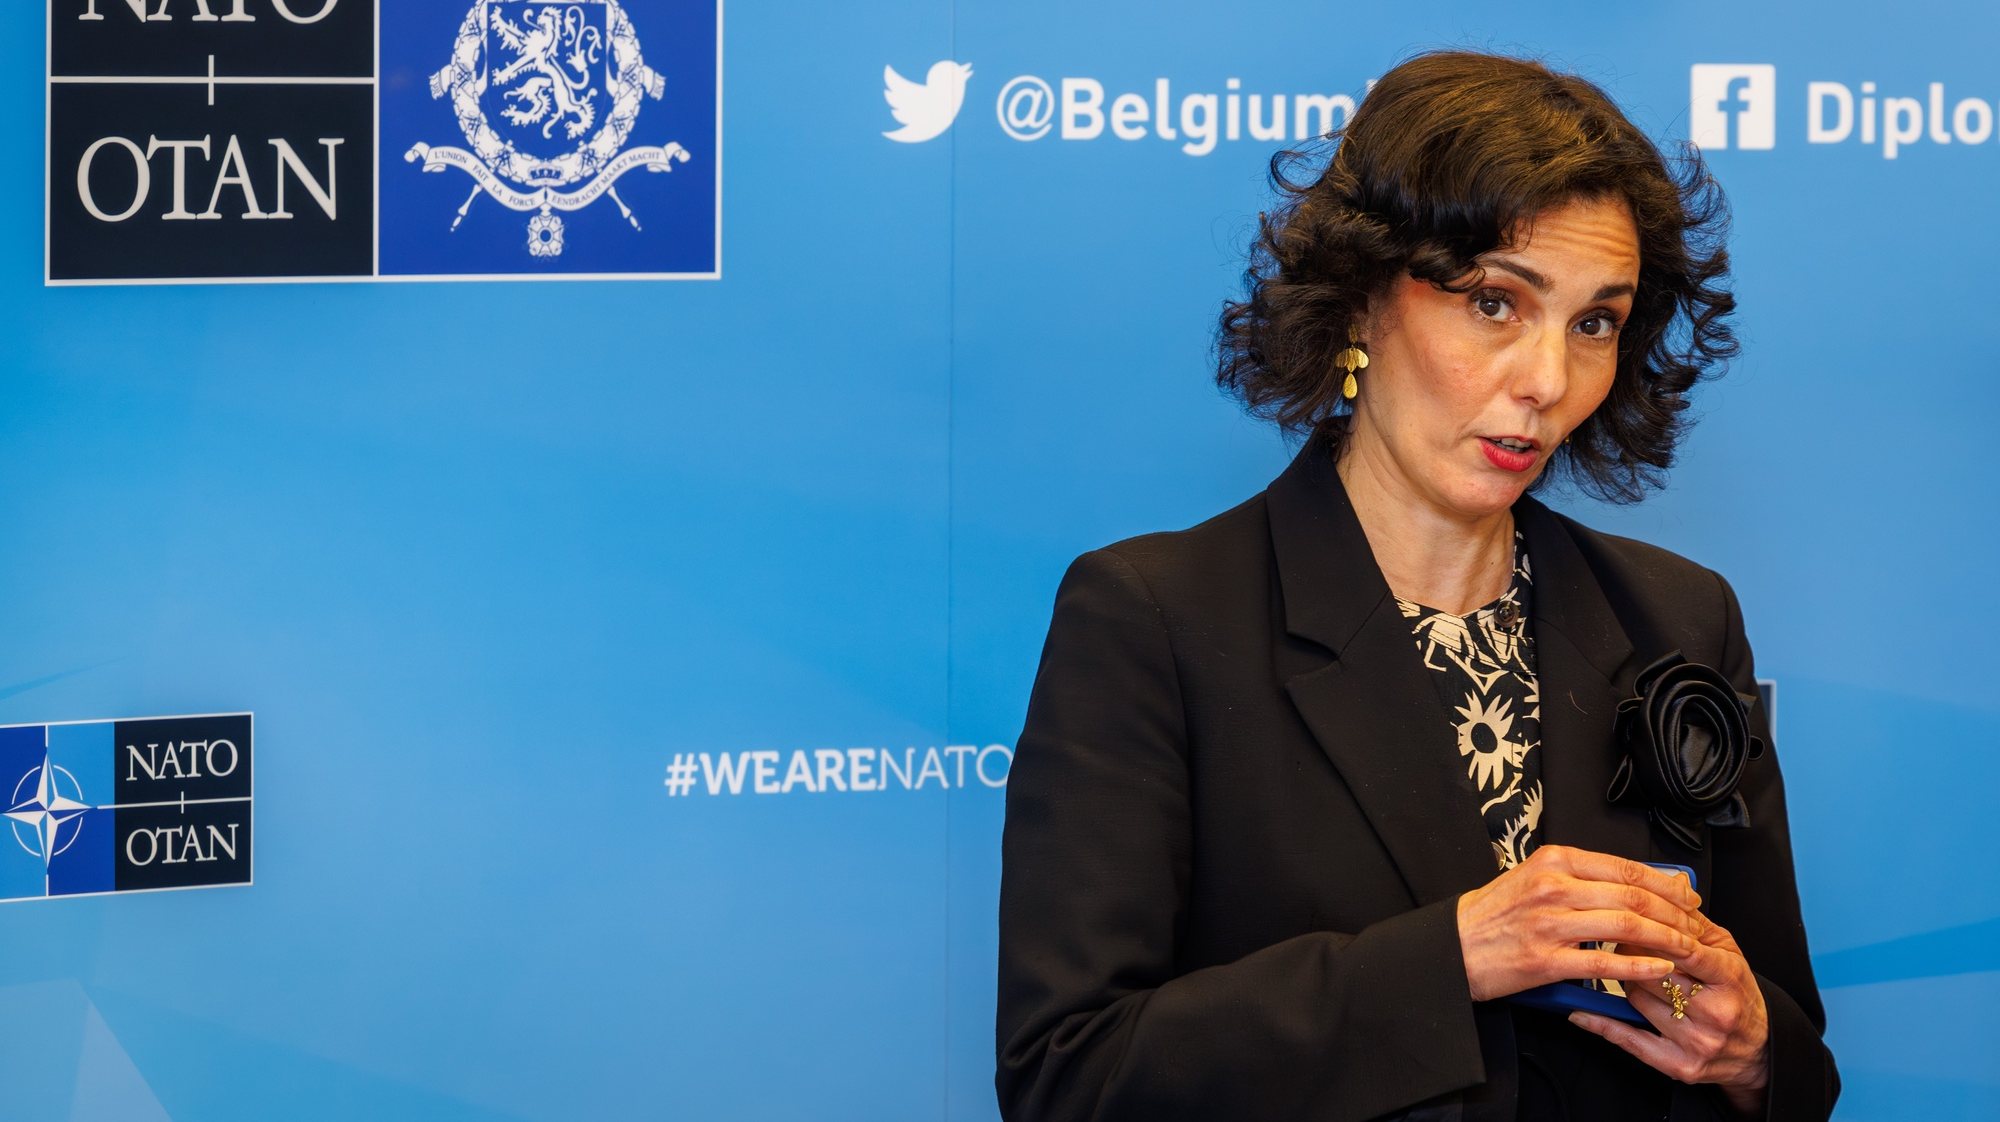 epa11255621 Belgian Minister of Foreign Affairs Hadja Lahbib unveils a Silver 10 Euro coin to commemorate 75 years of North Atlantic Treaty Organization (NATO) foundation at the Alliance headquarters in Brussels, Belgium, 02 April 2024. The event celebrating the enduring partnership between NATO and Belgium also coincides with the 75th anniversary of the Alliance. The intergovernmental military alliance NATO was founded on 04 April 1949.  EPA/OLIVIER MATTHYS